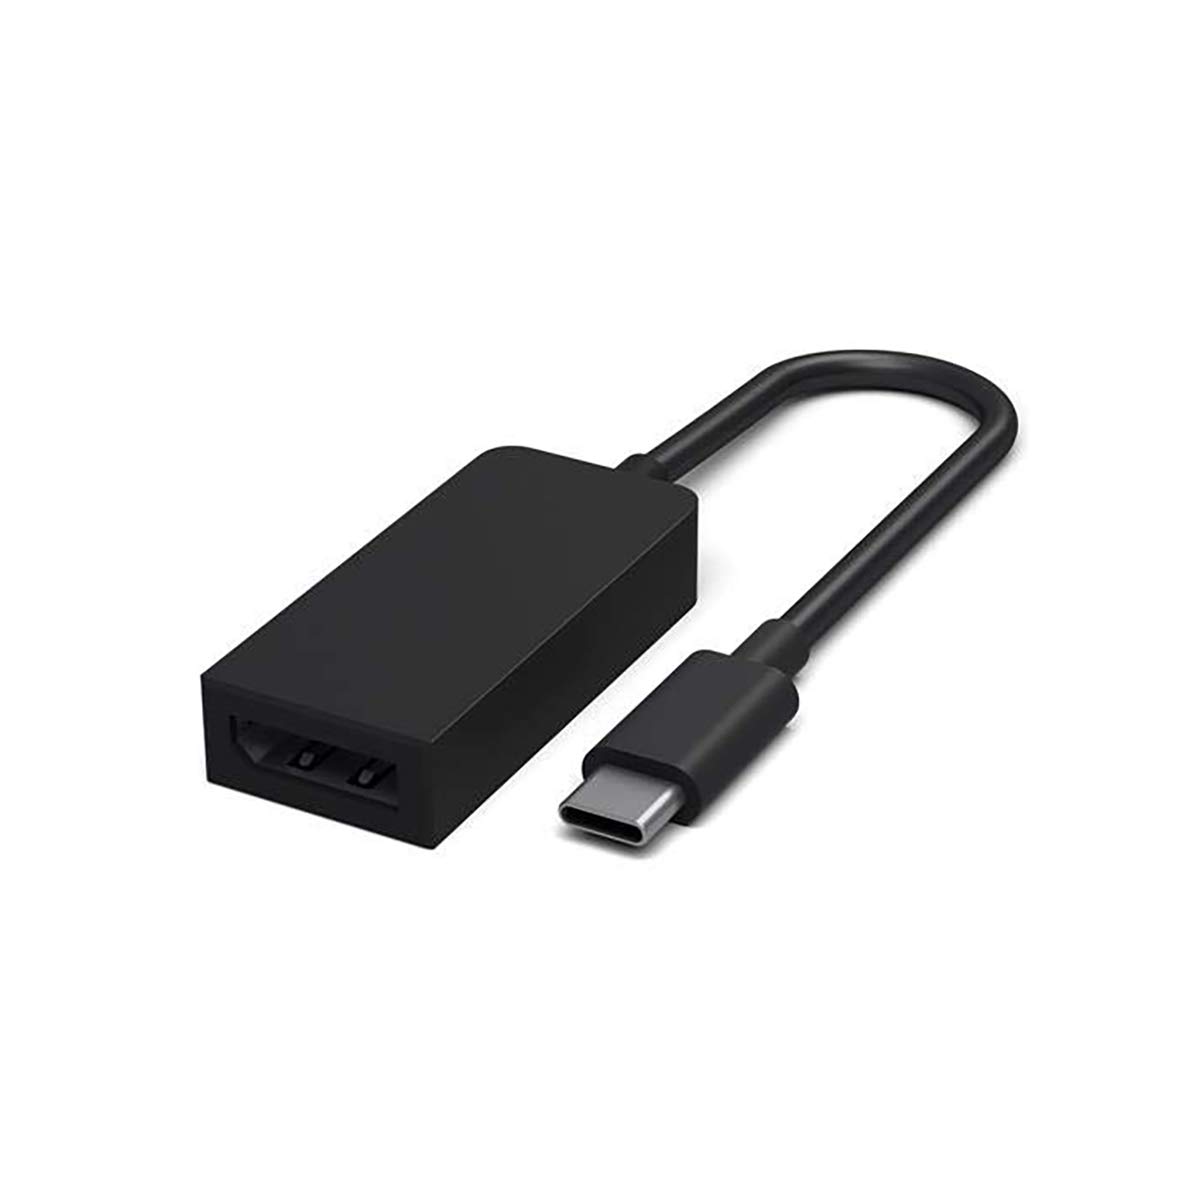 ADAPTER USB-C TO DP ALL DEVICES UPC 0889842287233 - JVZ-00001